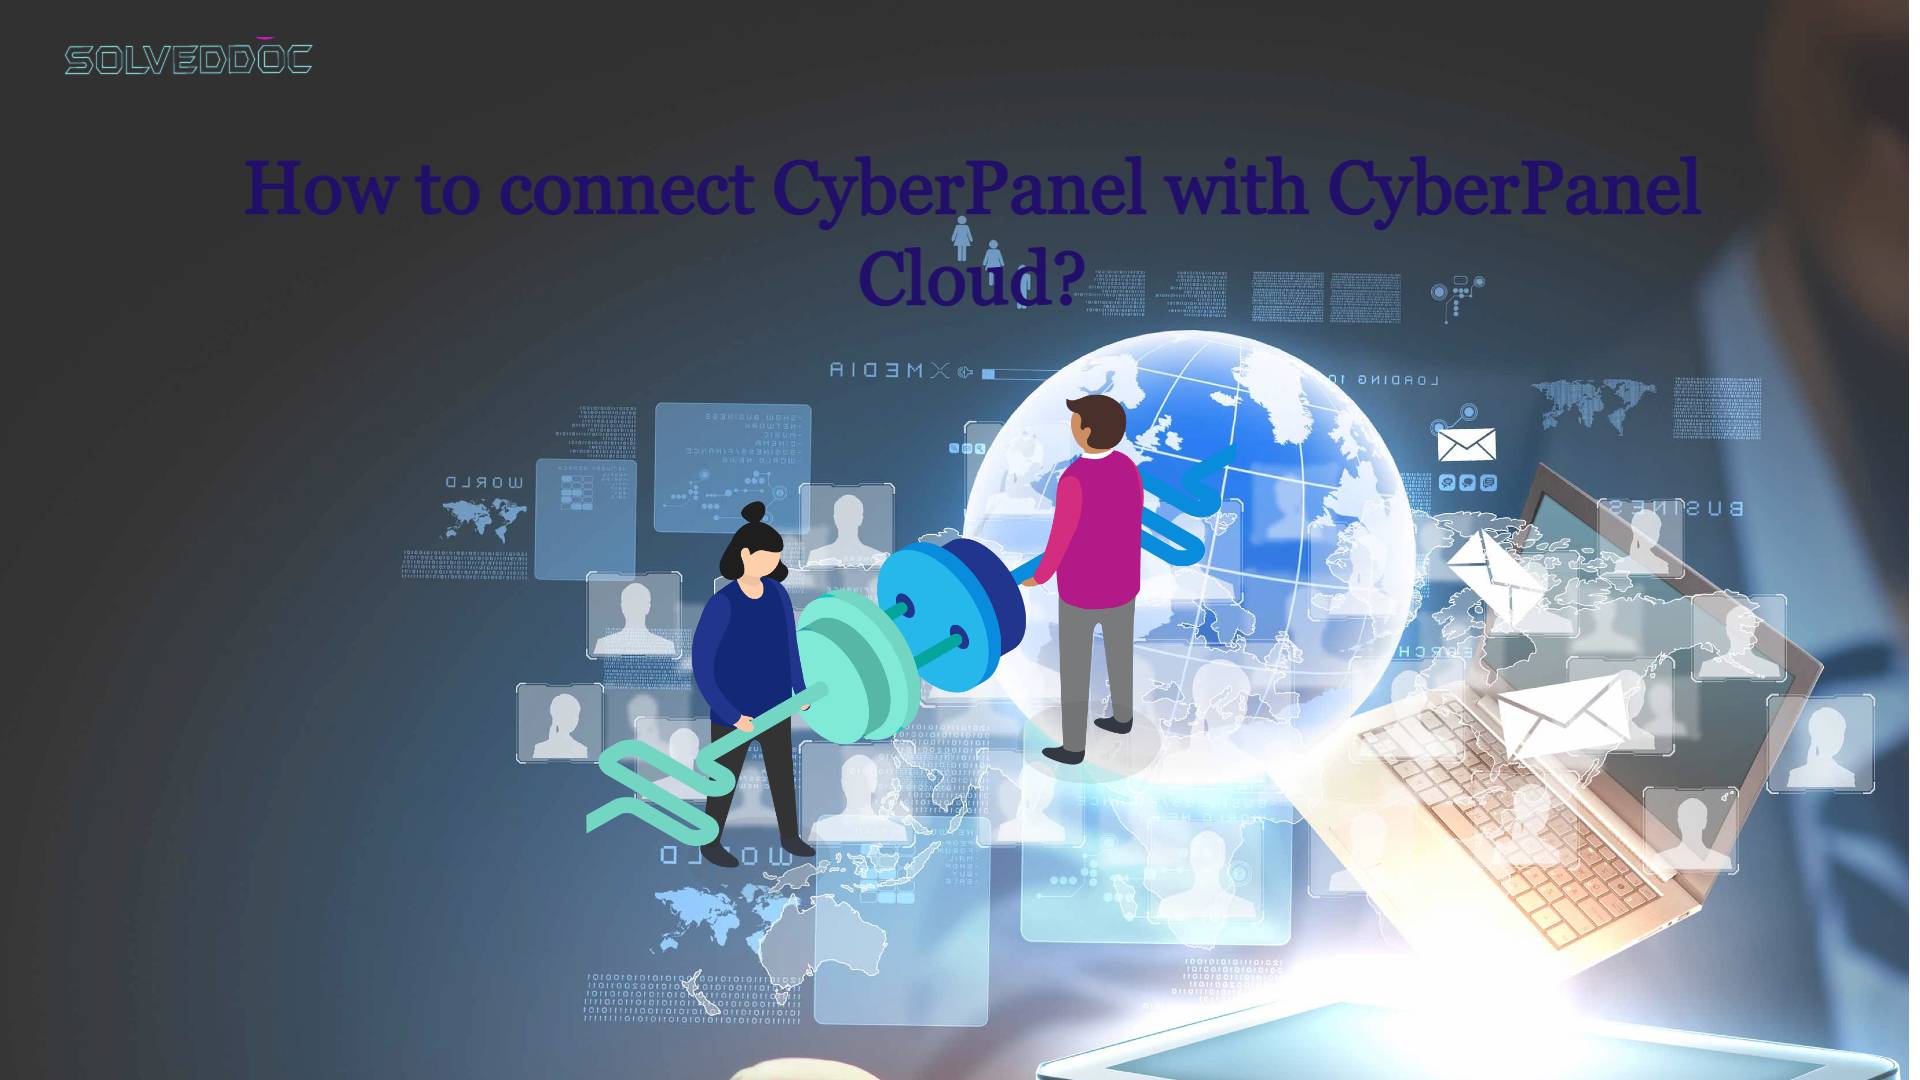 How to connect CyberPanel with CyberPanel Cloud?